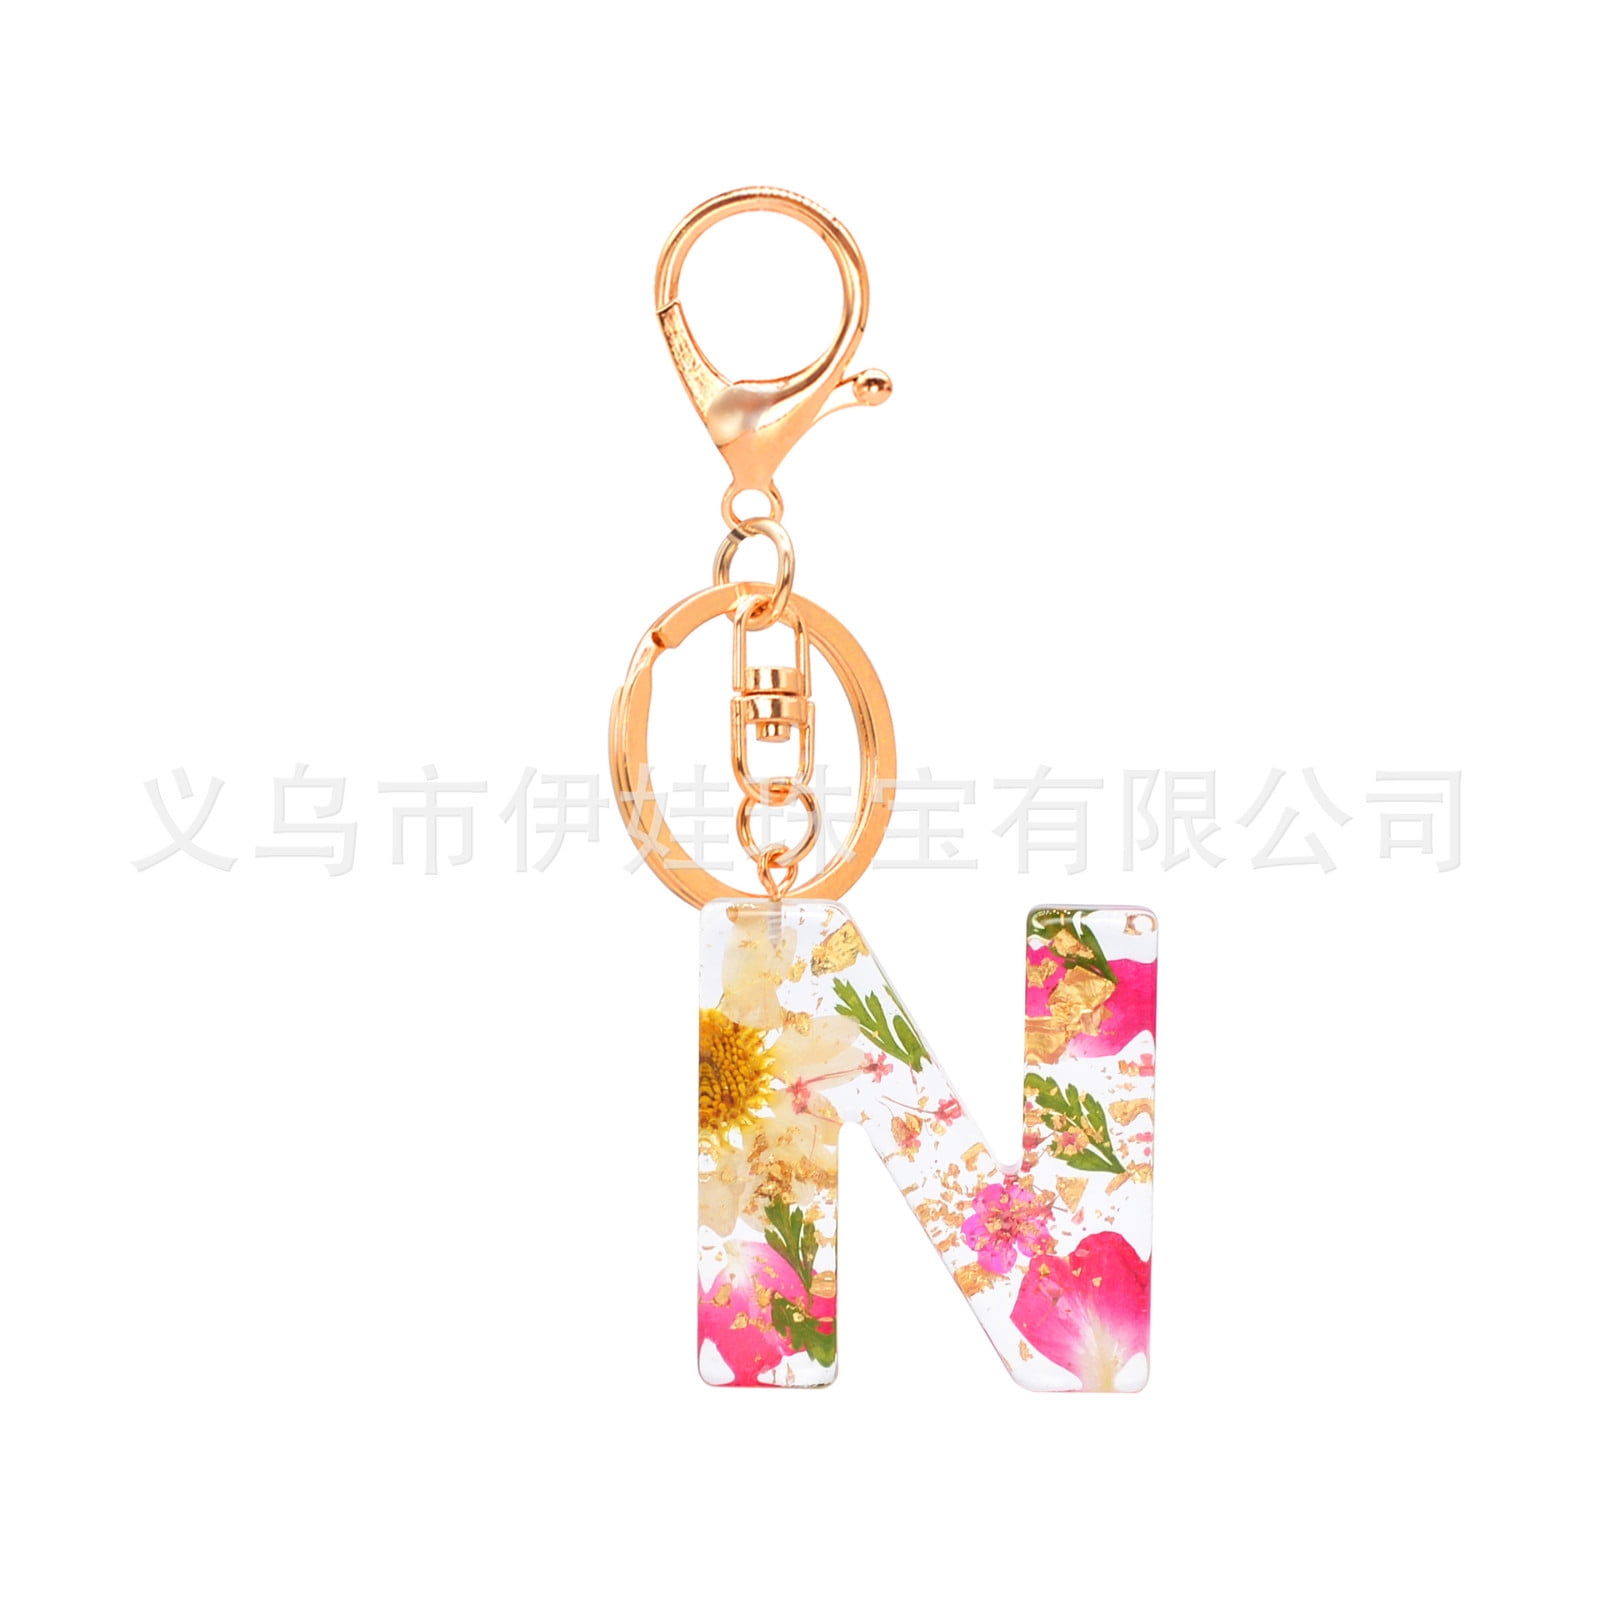  Wocide Initial Letter Keychain for Women Cute Keychains  Aesthetic Girly Resin Alphabet Monogram Key Chain Charm for Car Keys Girls  Kids Backpacks Purse Bag Charms for Handbags(Letter A) : Clothing, Shoes